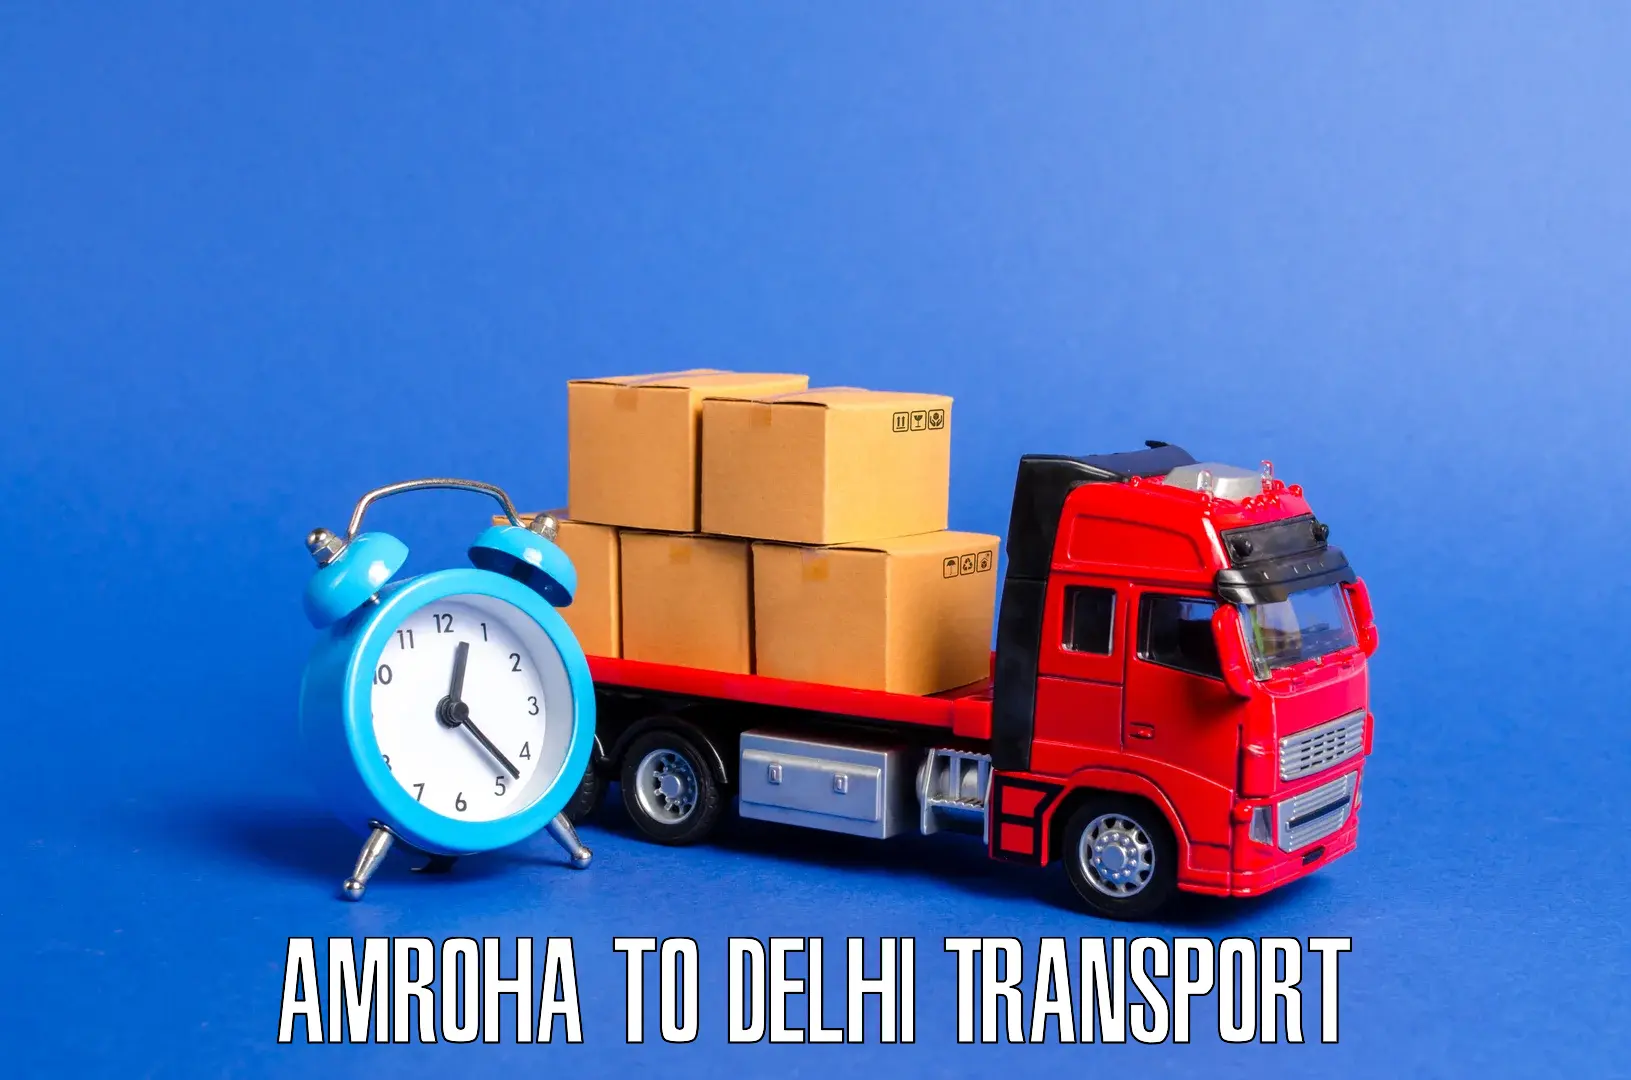 Transport bike from one state to another Amroha to Kalkaji